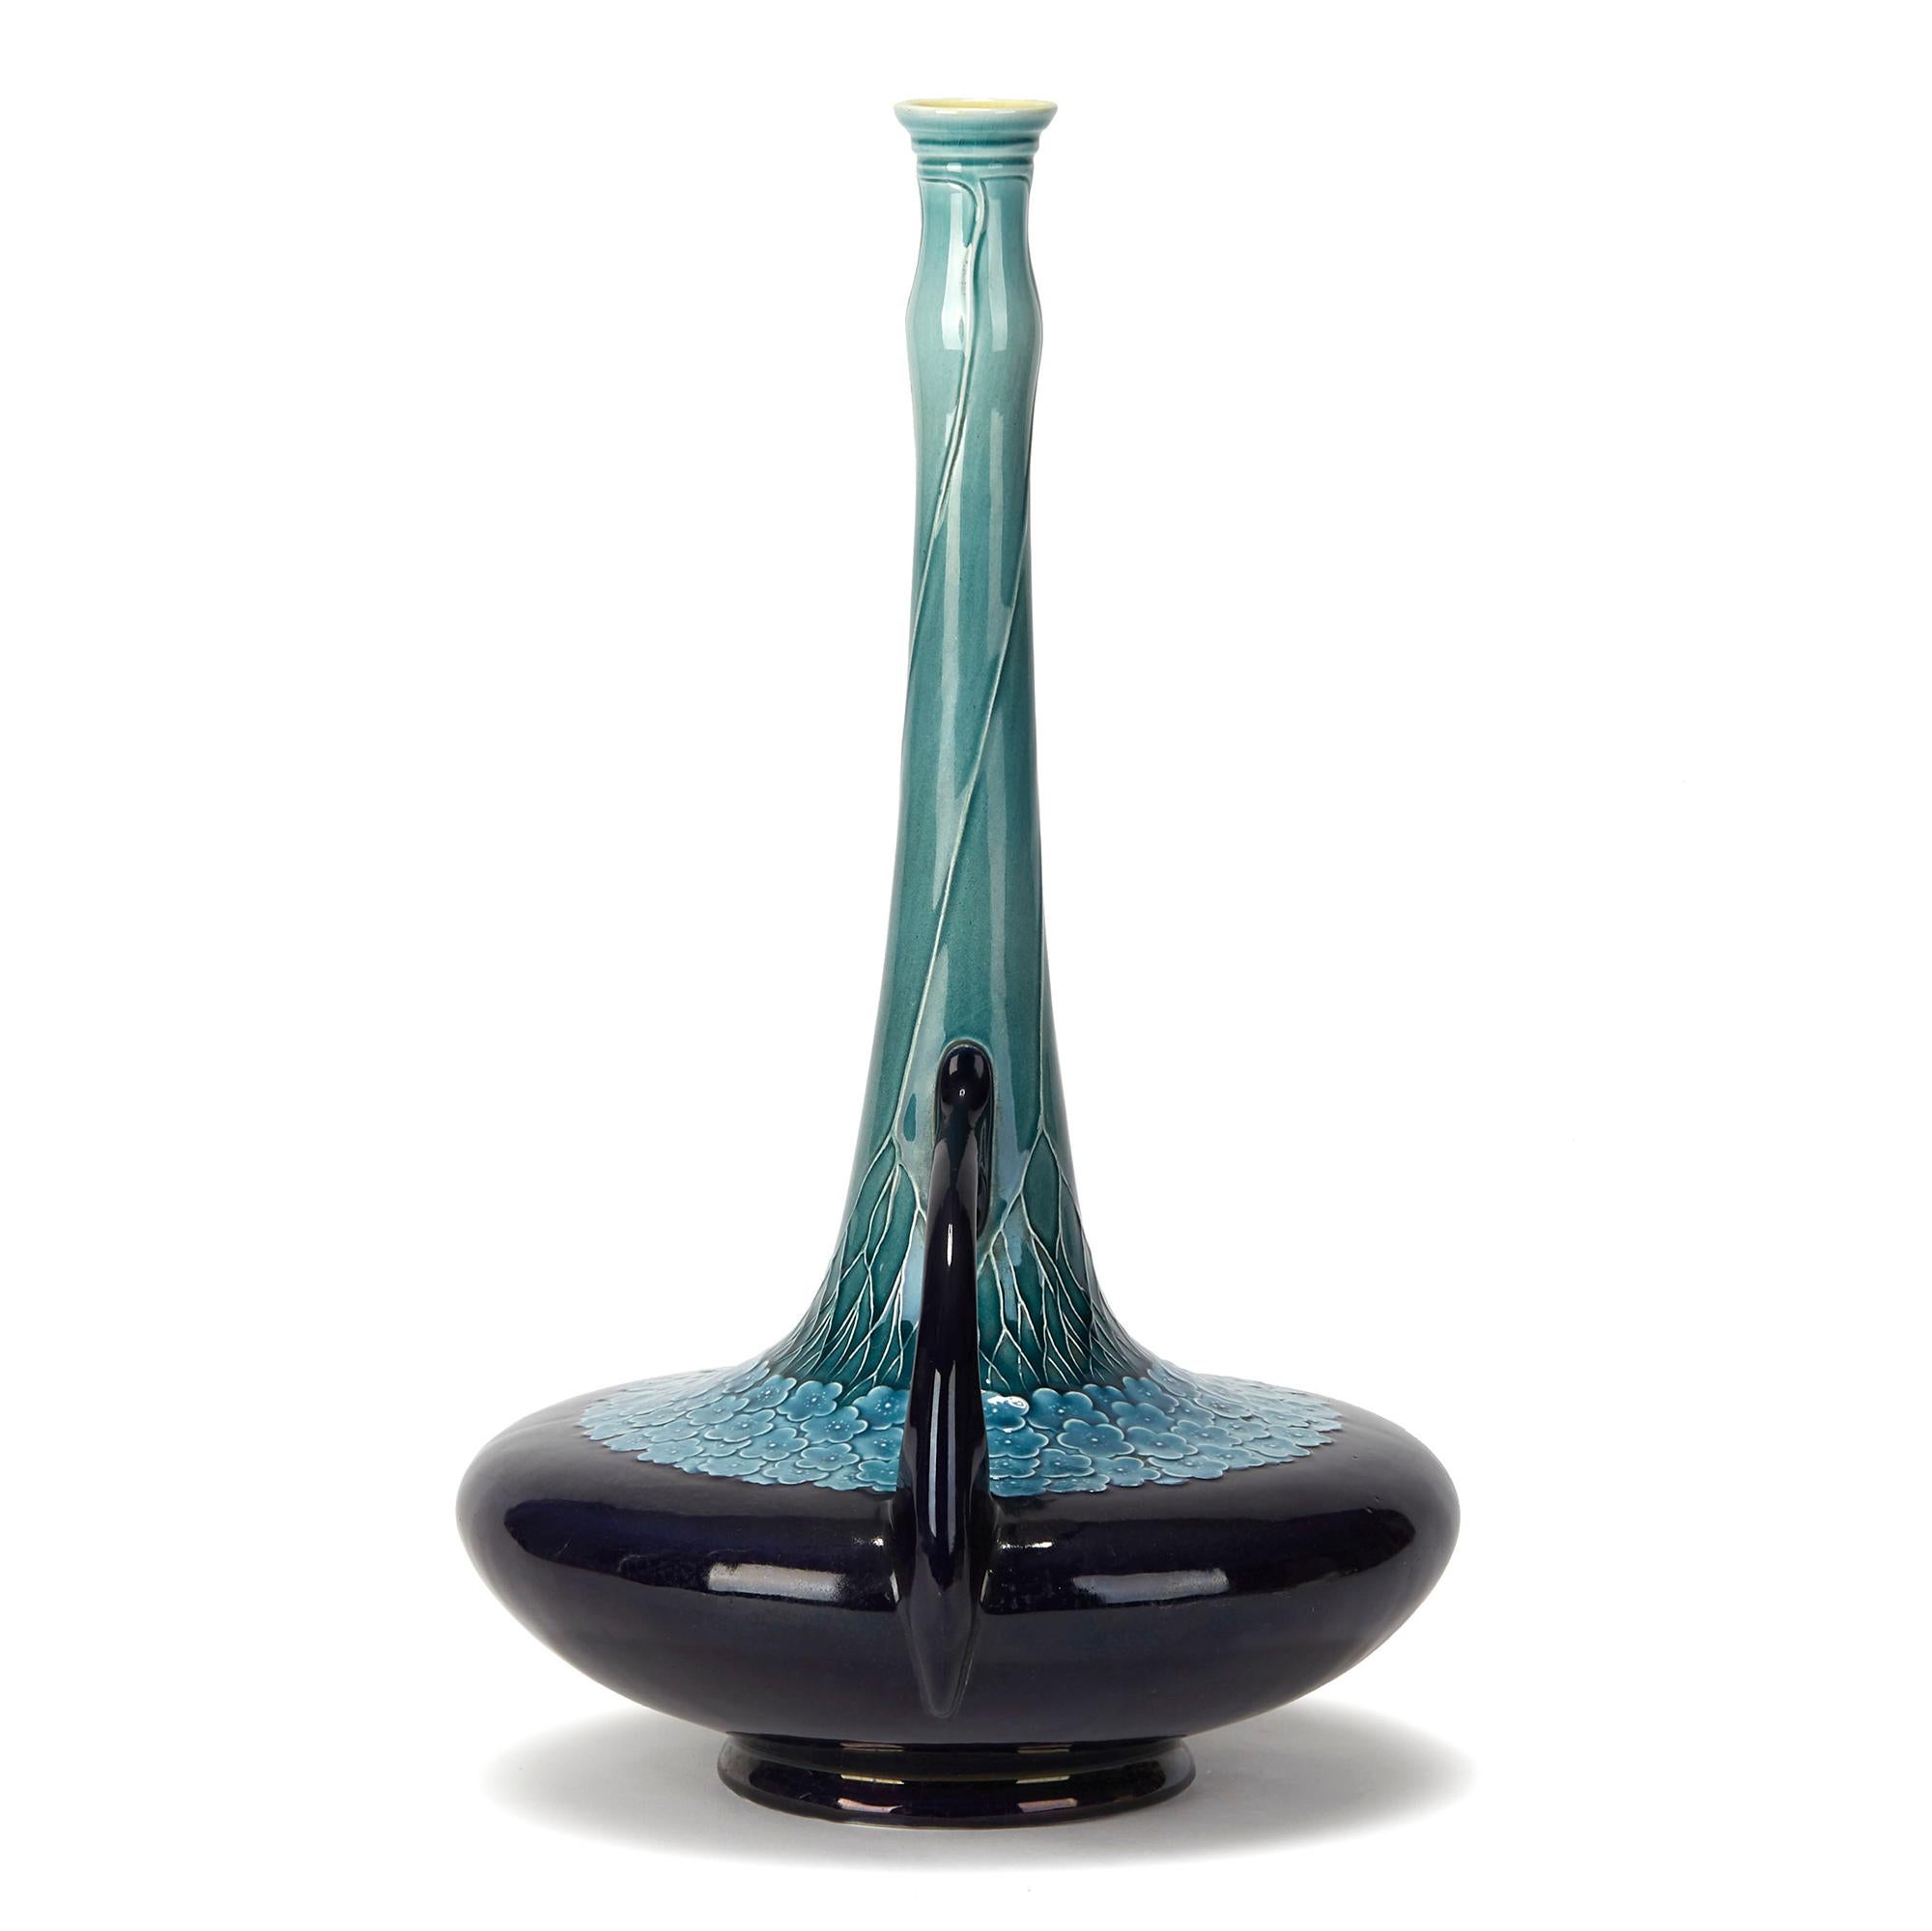 A stunning and elegant Art Nouveau Villeroy & Boch Mettlach twin handled art pottery vase of bottle shape with a squat wide rounded body standing on a narrow rounded foot with a tall slender neck with loop handles applied to either side of the body.